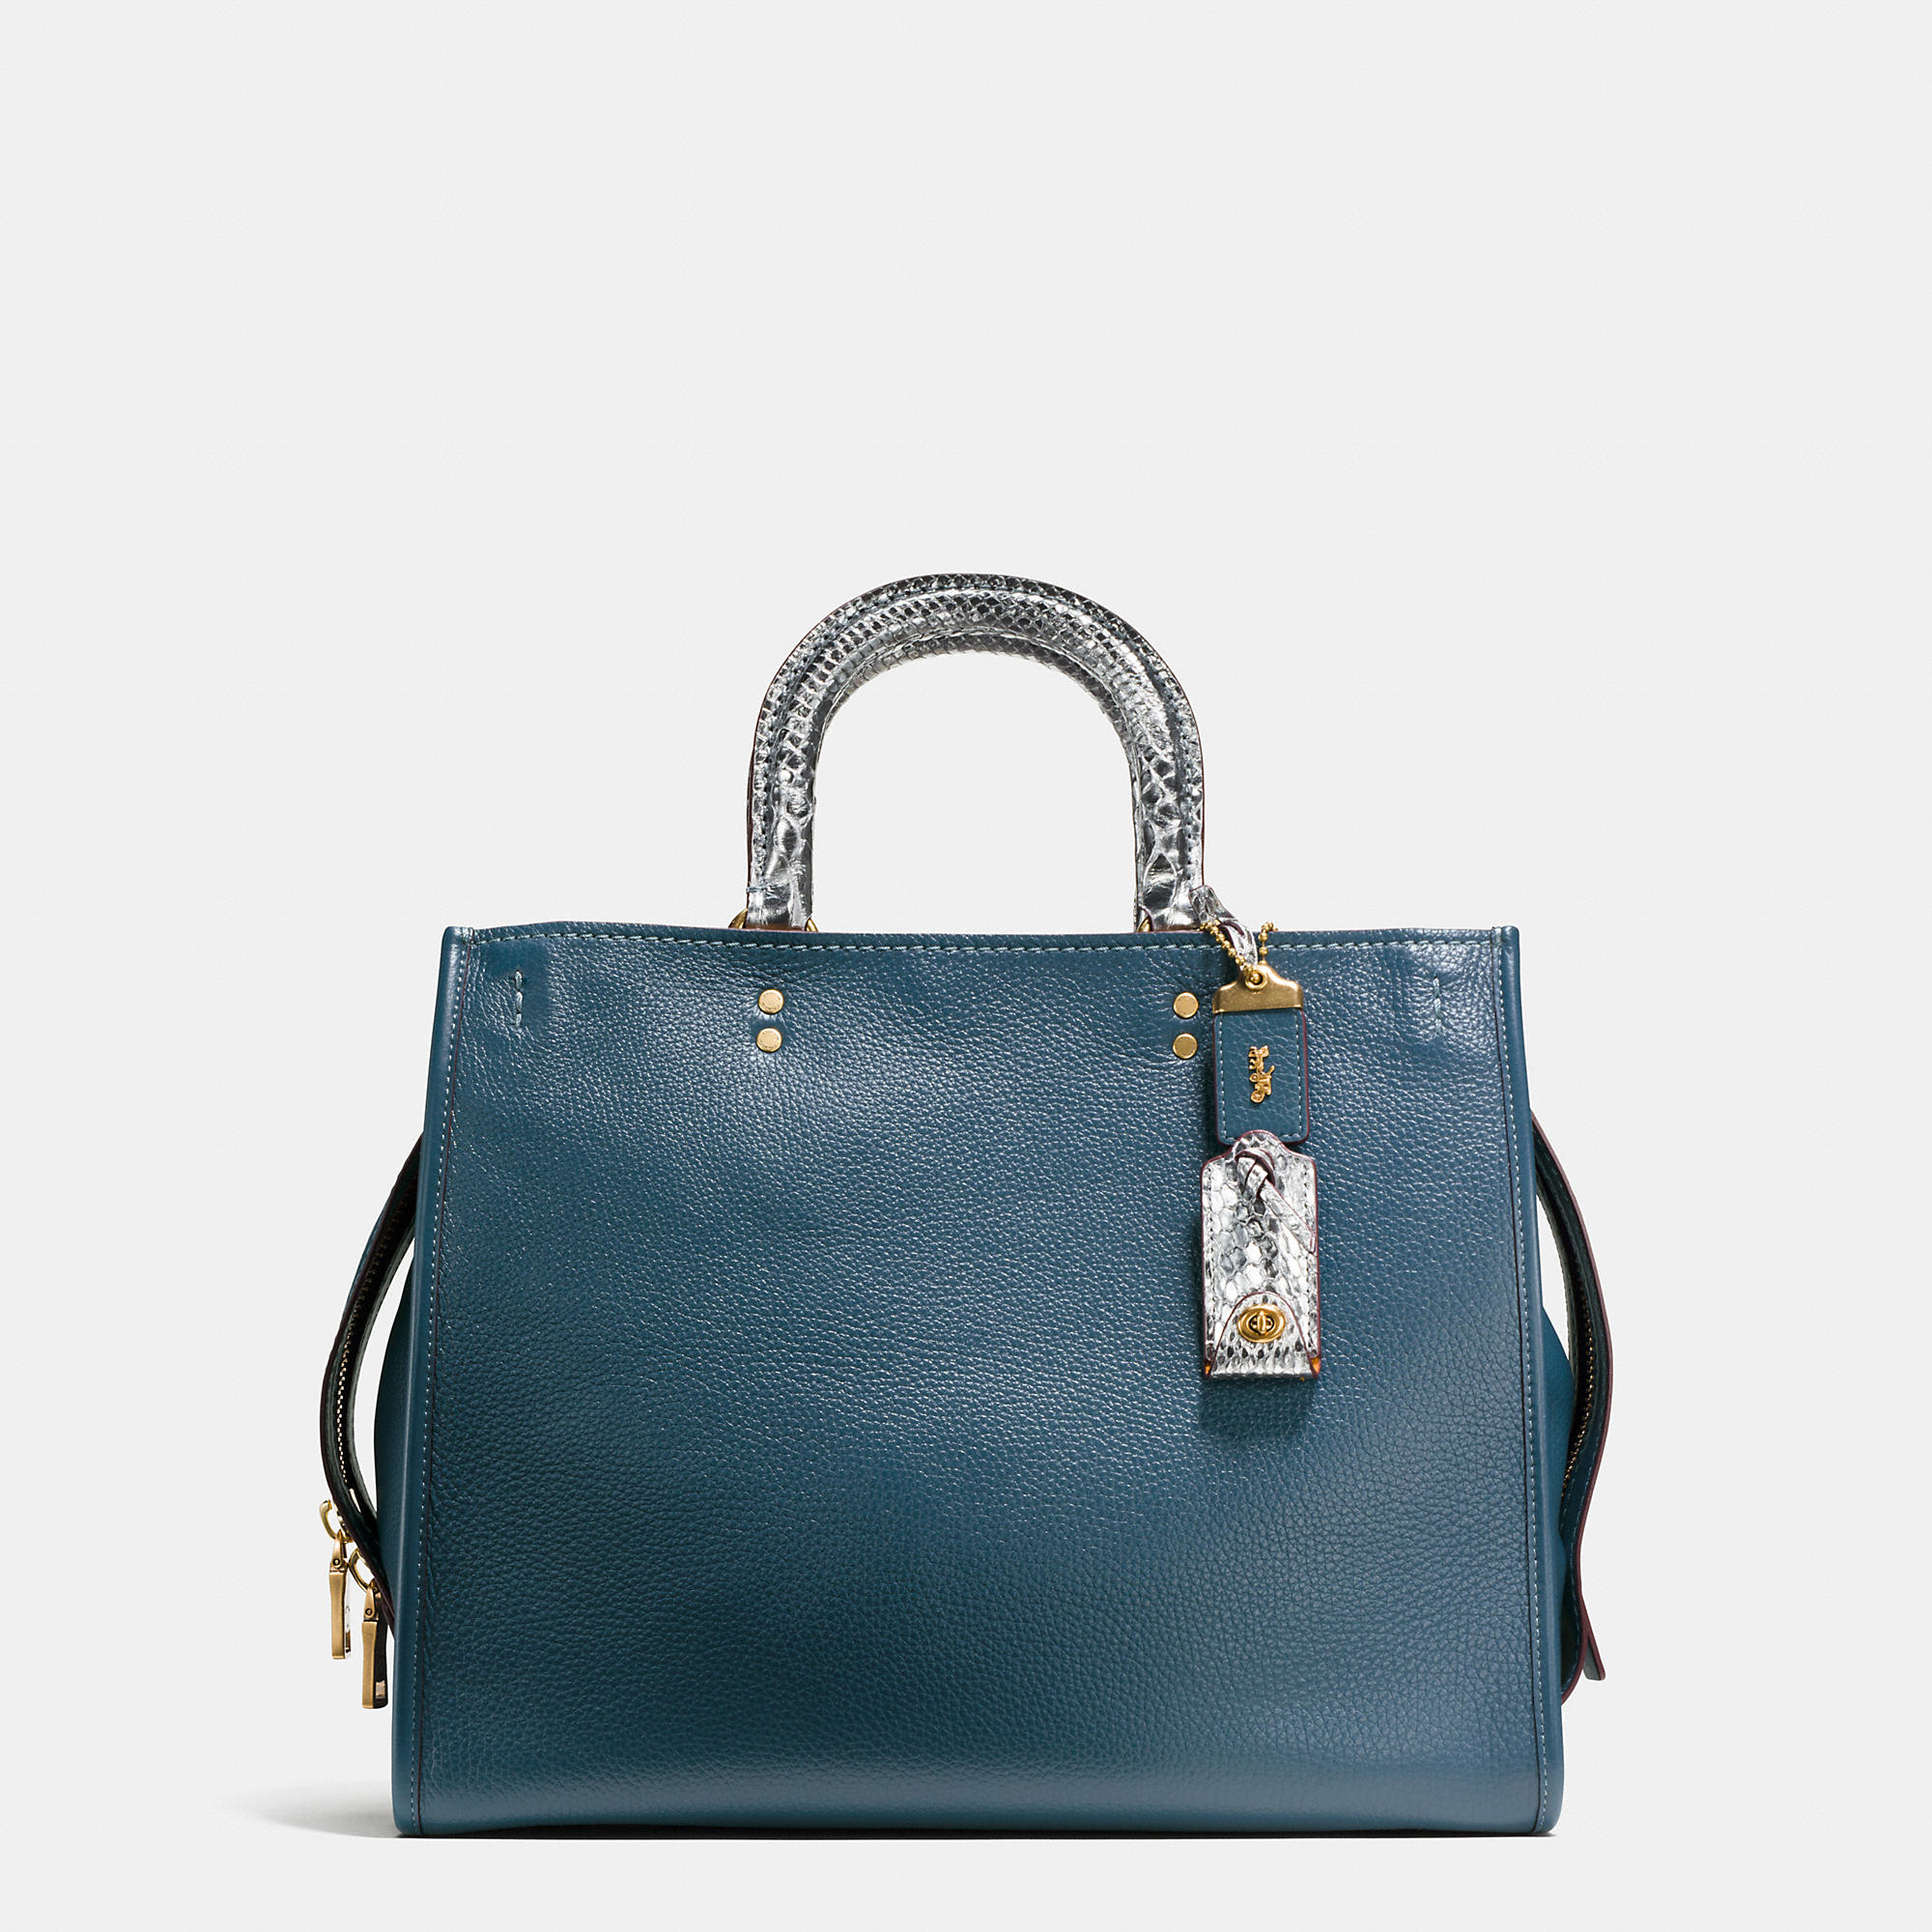 Lyst - Coach Rogue 36 Color-Blocked Python Tote Bag in Blue